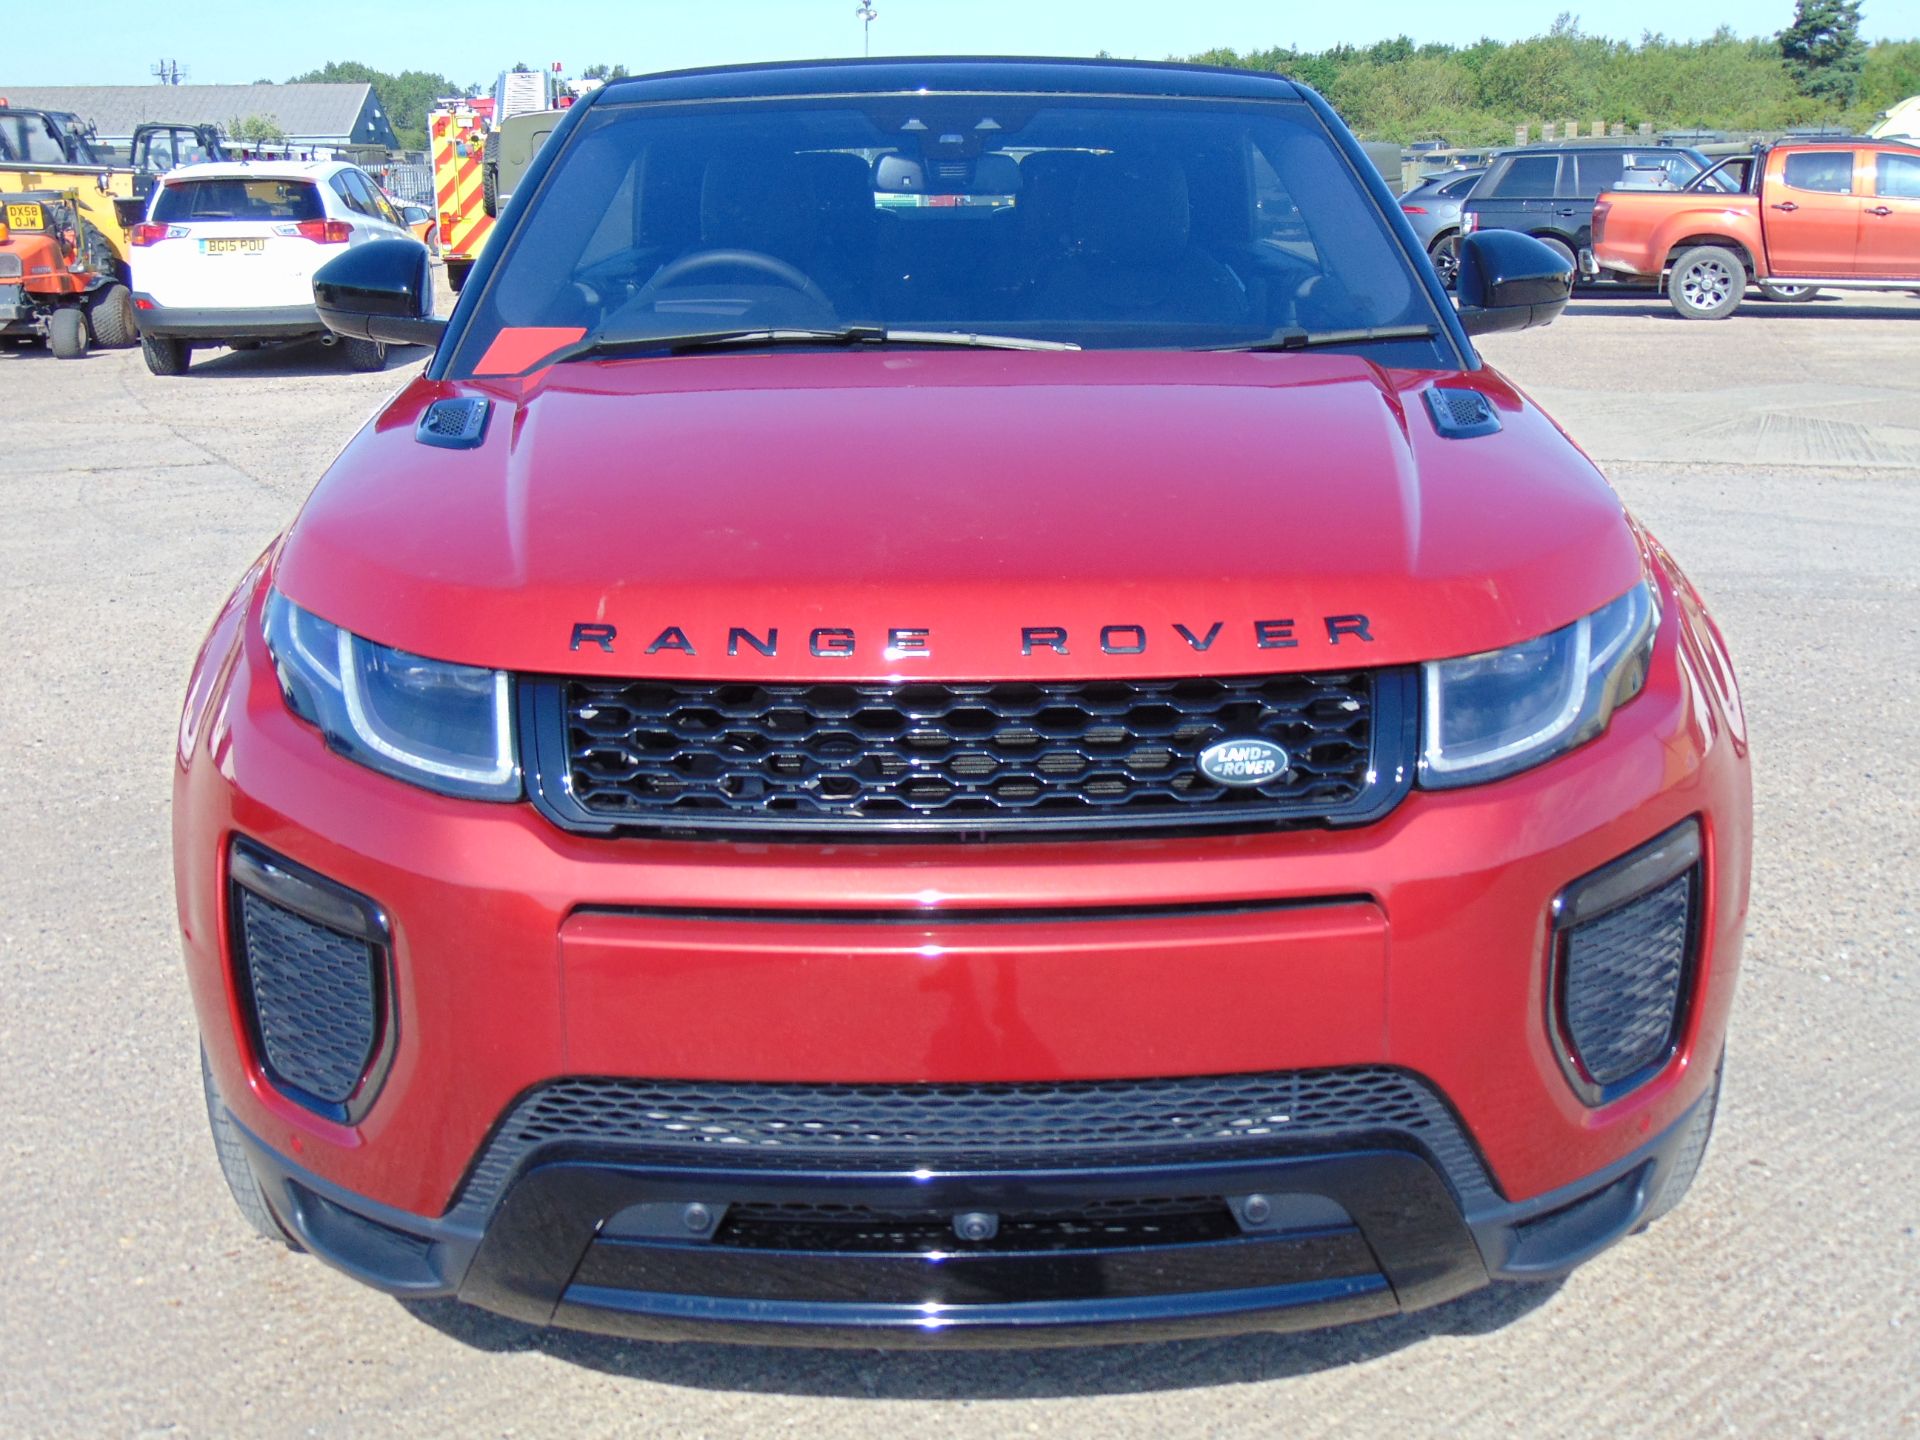 NEW UNUSED Range Rover Evoque 2.0 i4 HSE Dynamic Convertible - Image 9 of 39